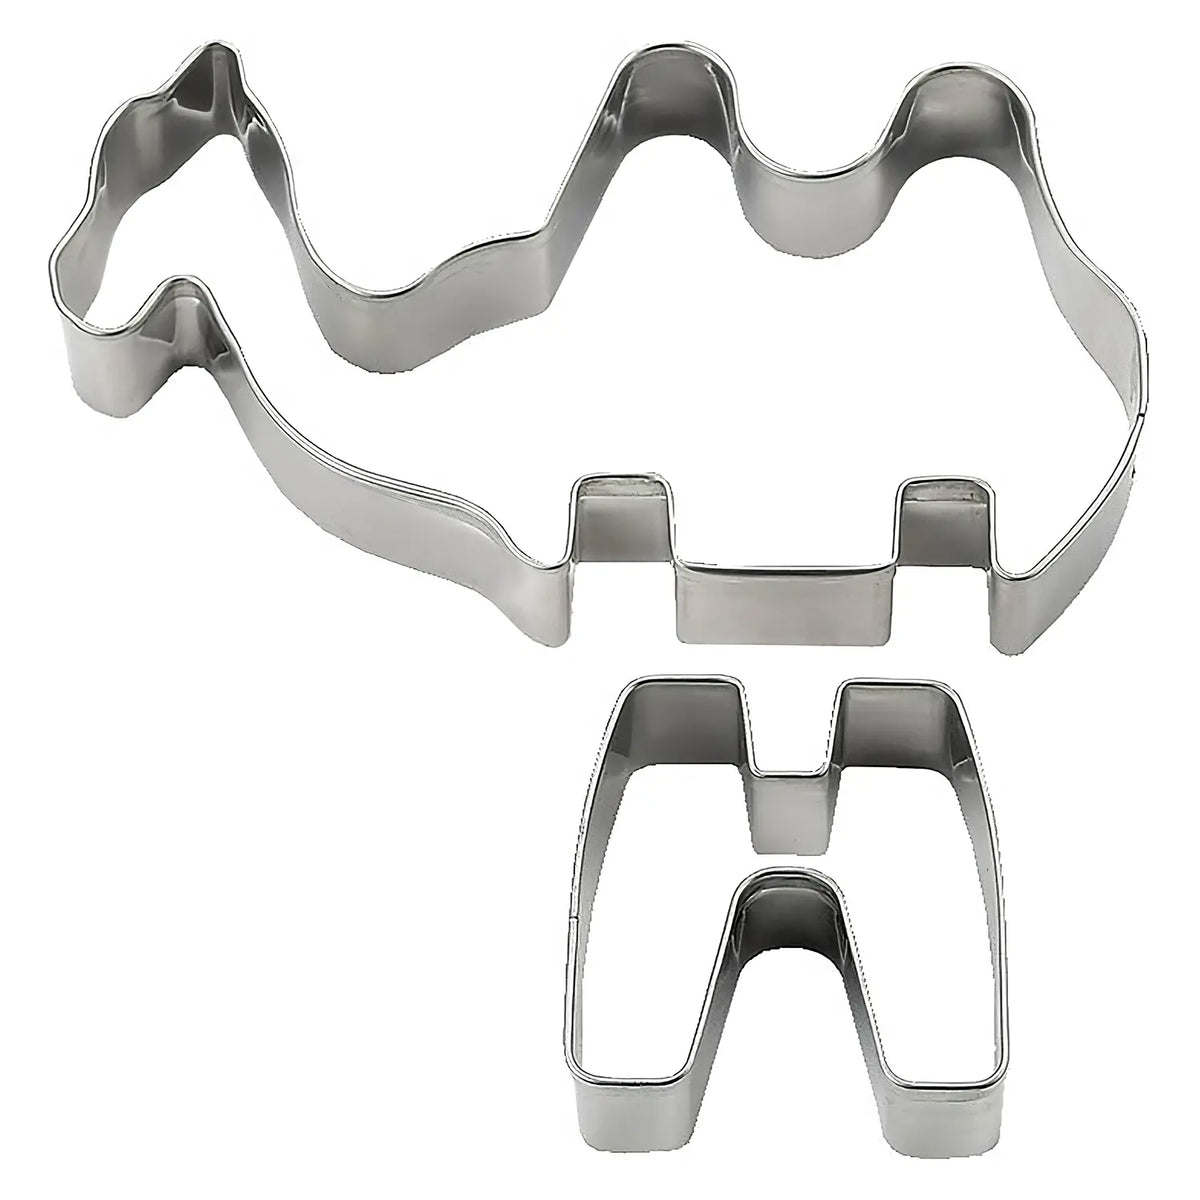 TIGERCROWN Cake Land Stainless Steel Cookie Cutter 3D Camel